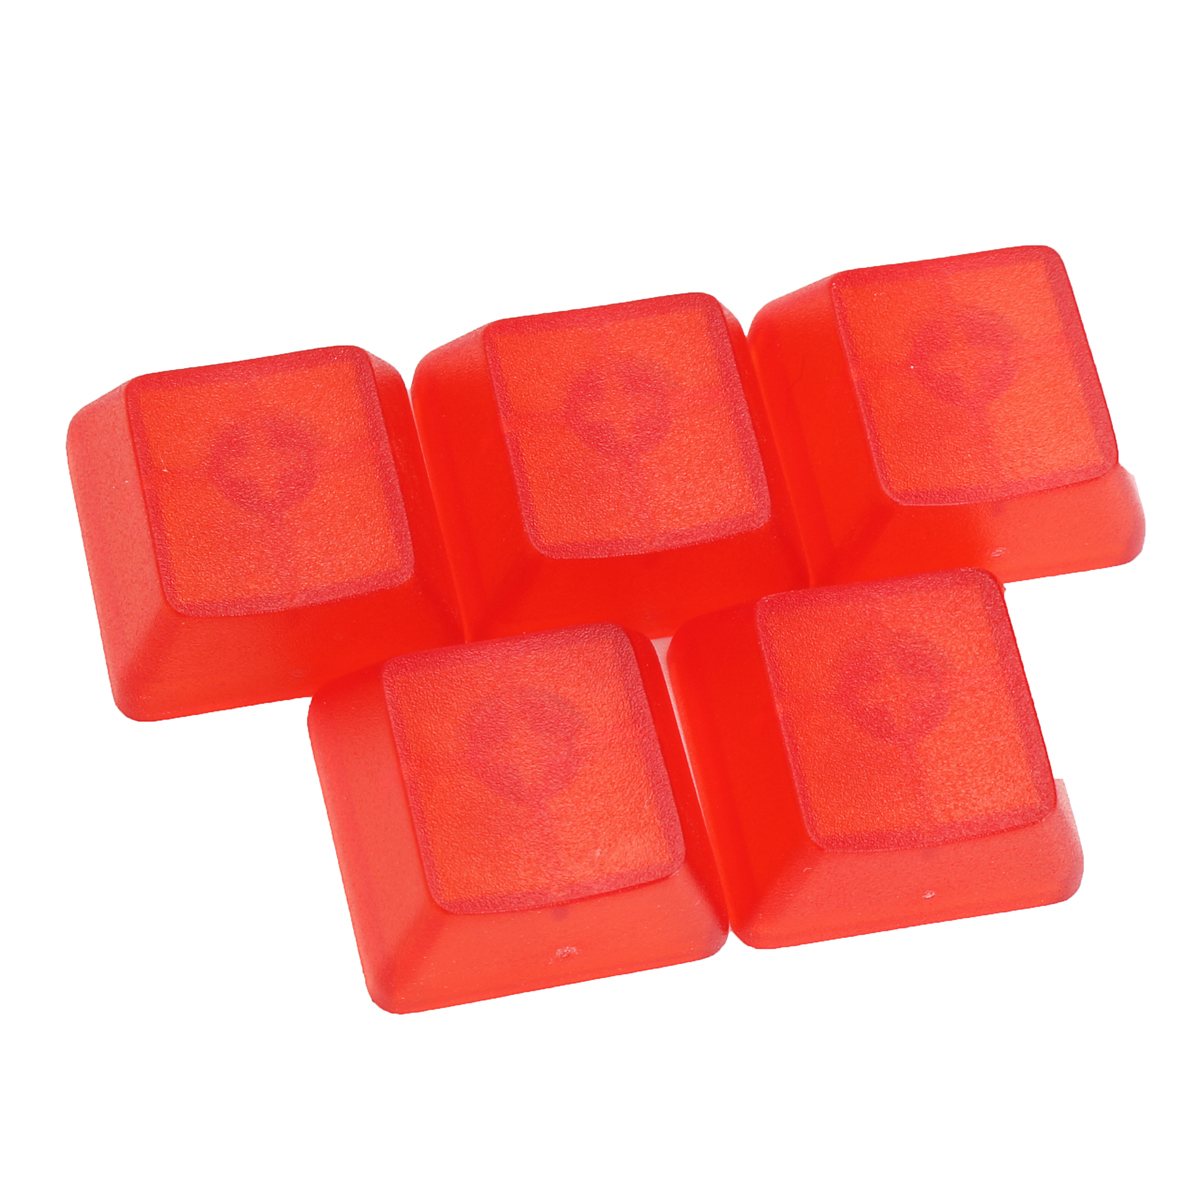 

5PCs Transparent Keycap Clear All Height Red White for Mechanical Keyboard R1 R2 R3 R4